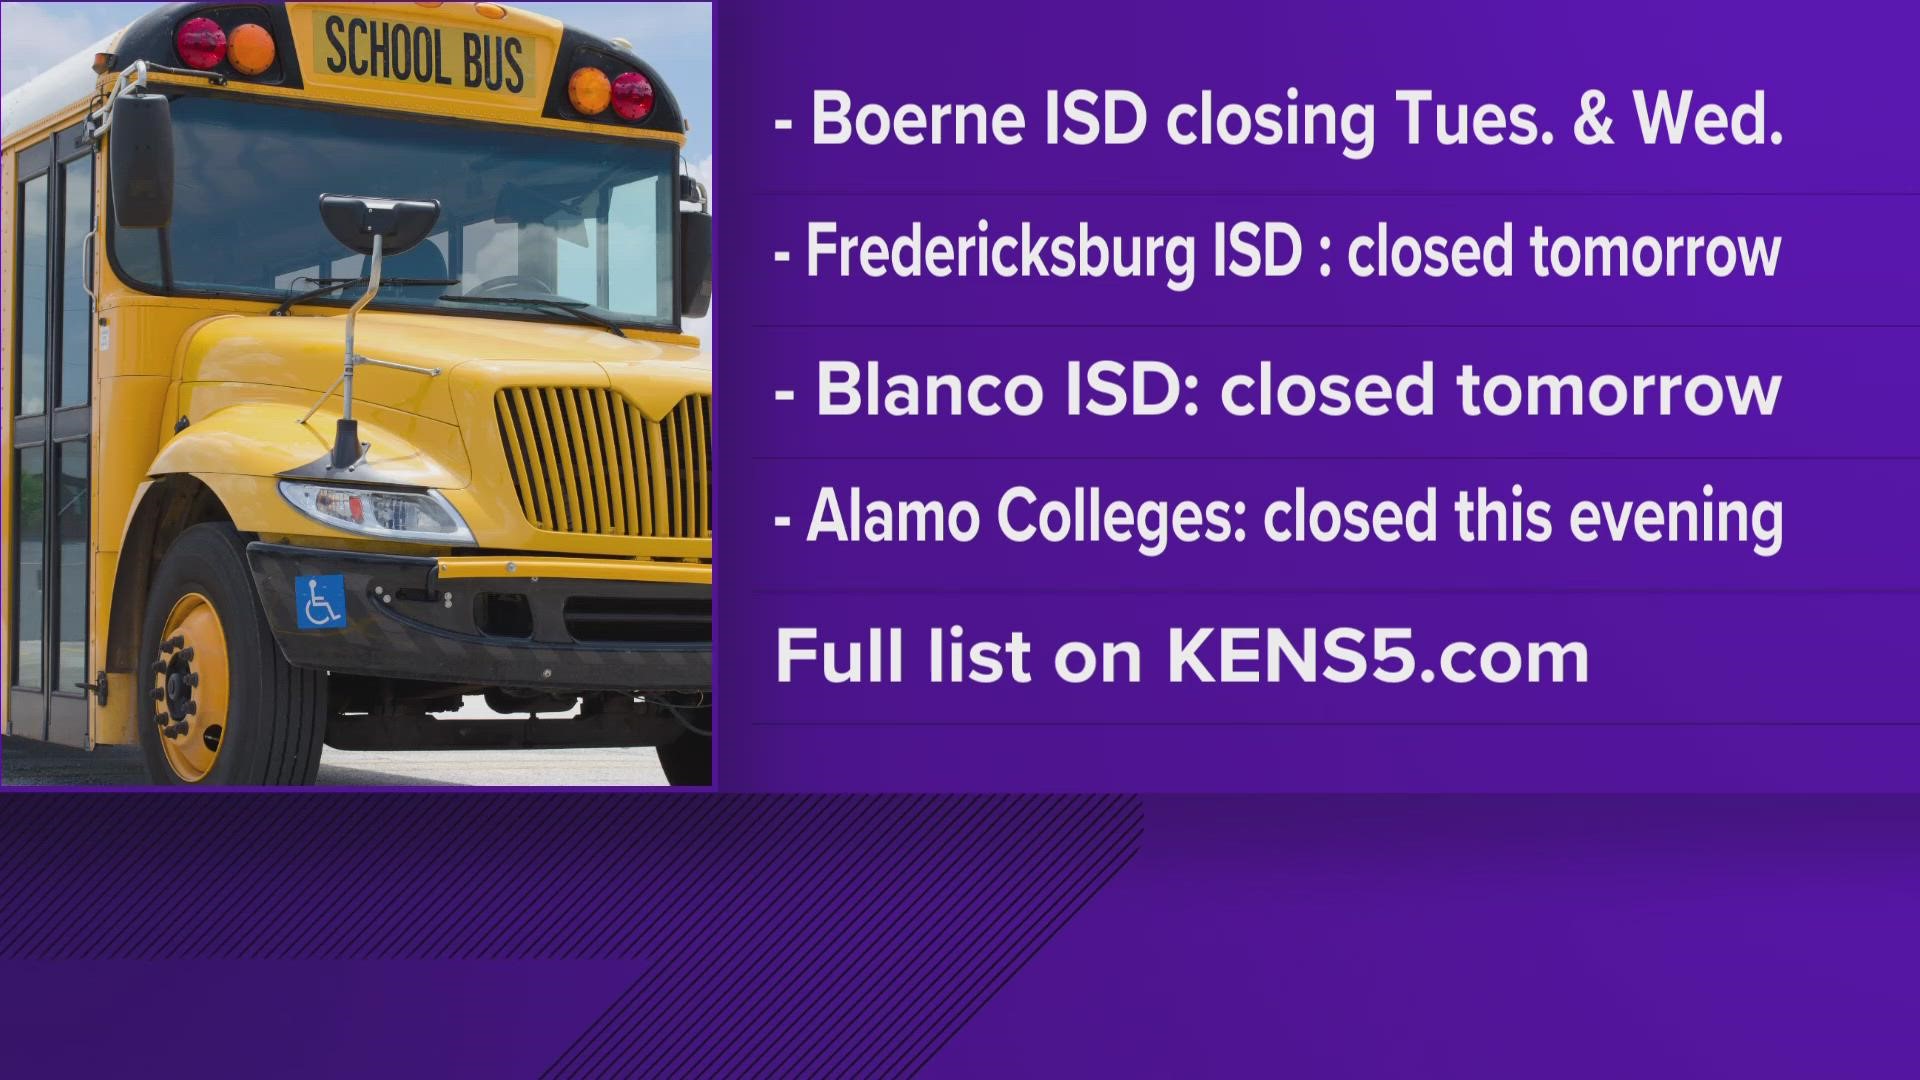 Here's a look at the current status of school districts in the San Antonio area and across South Texas.